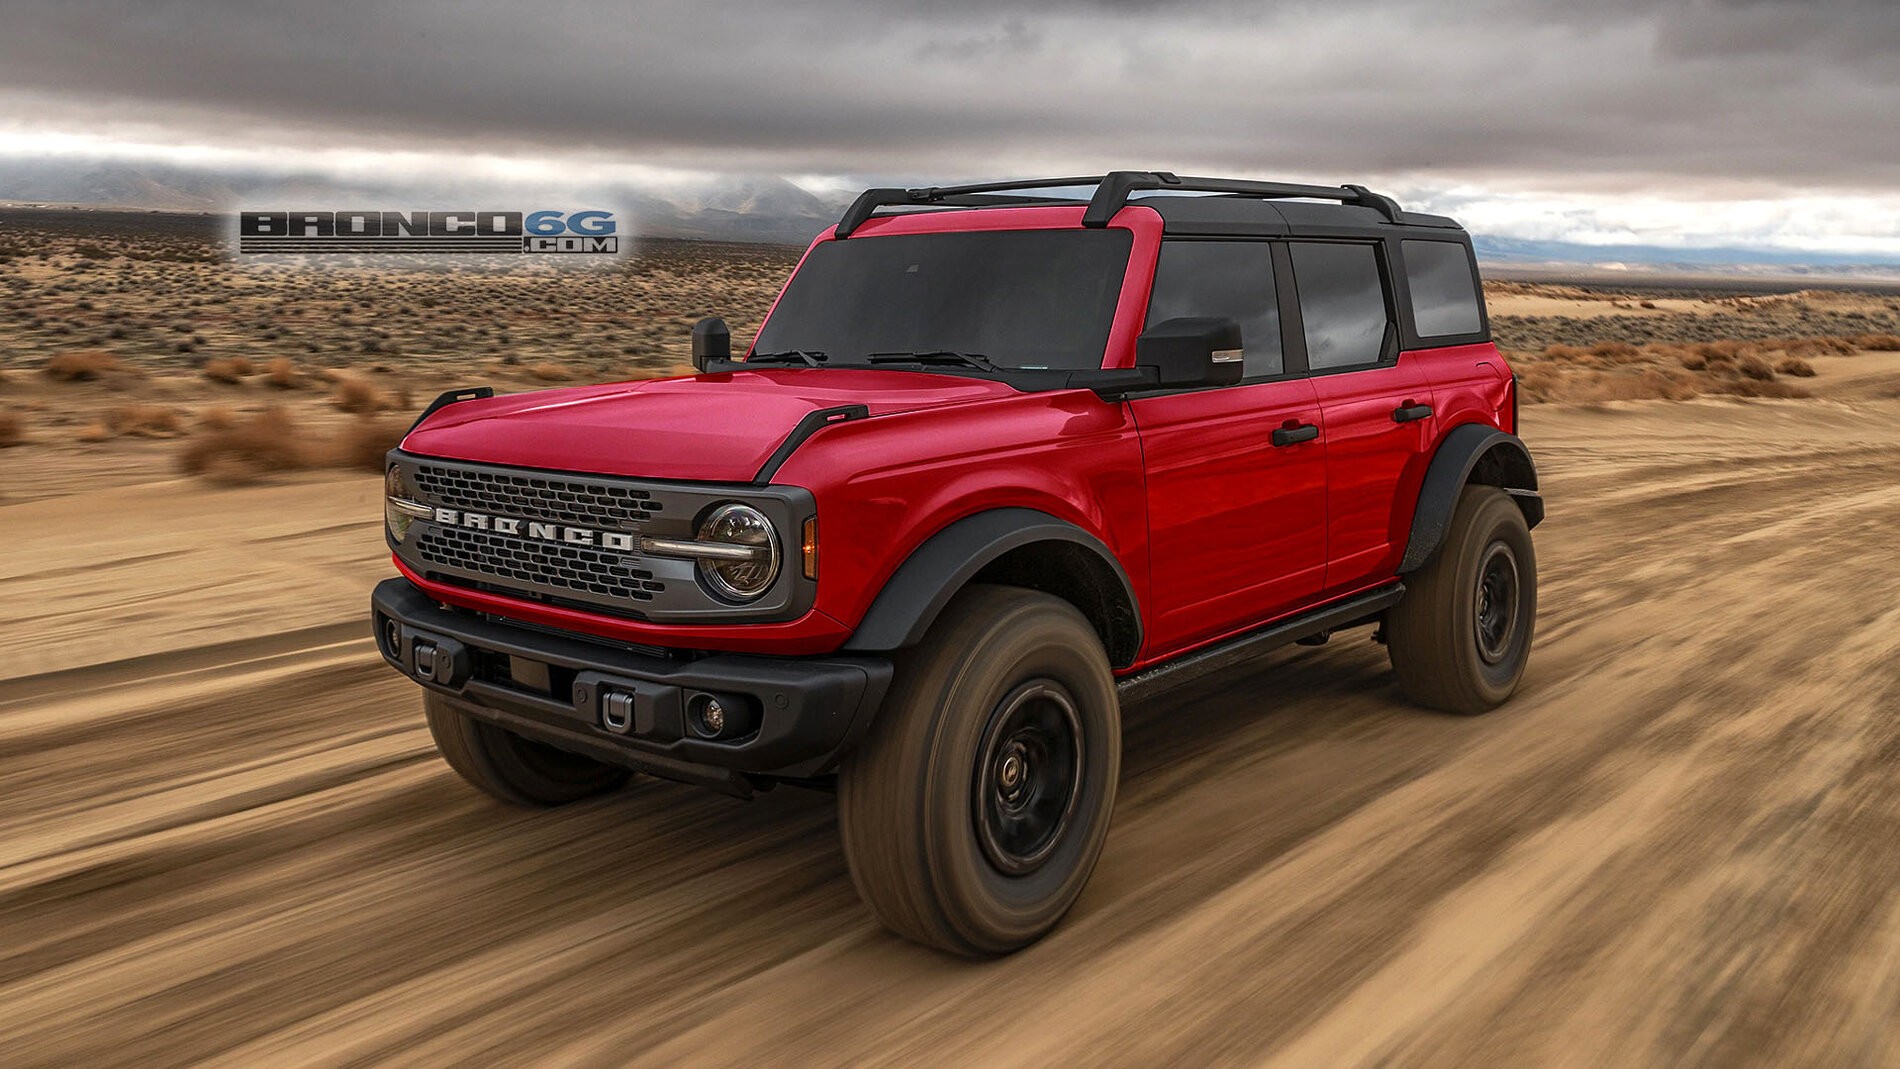 THE PUNCH SOUTH AMERICA See the 2021 Ford Bronco Sasquatch in All